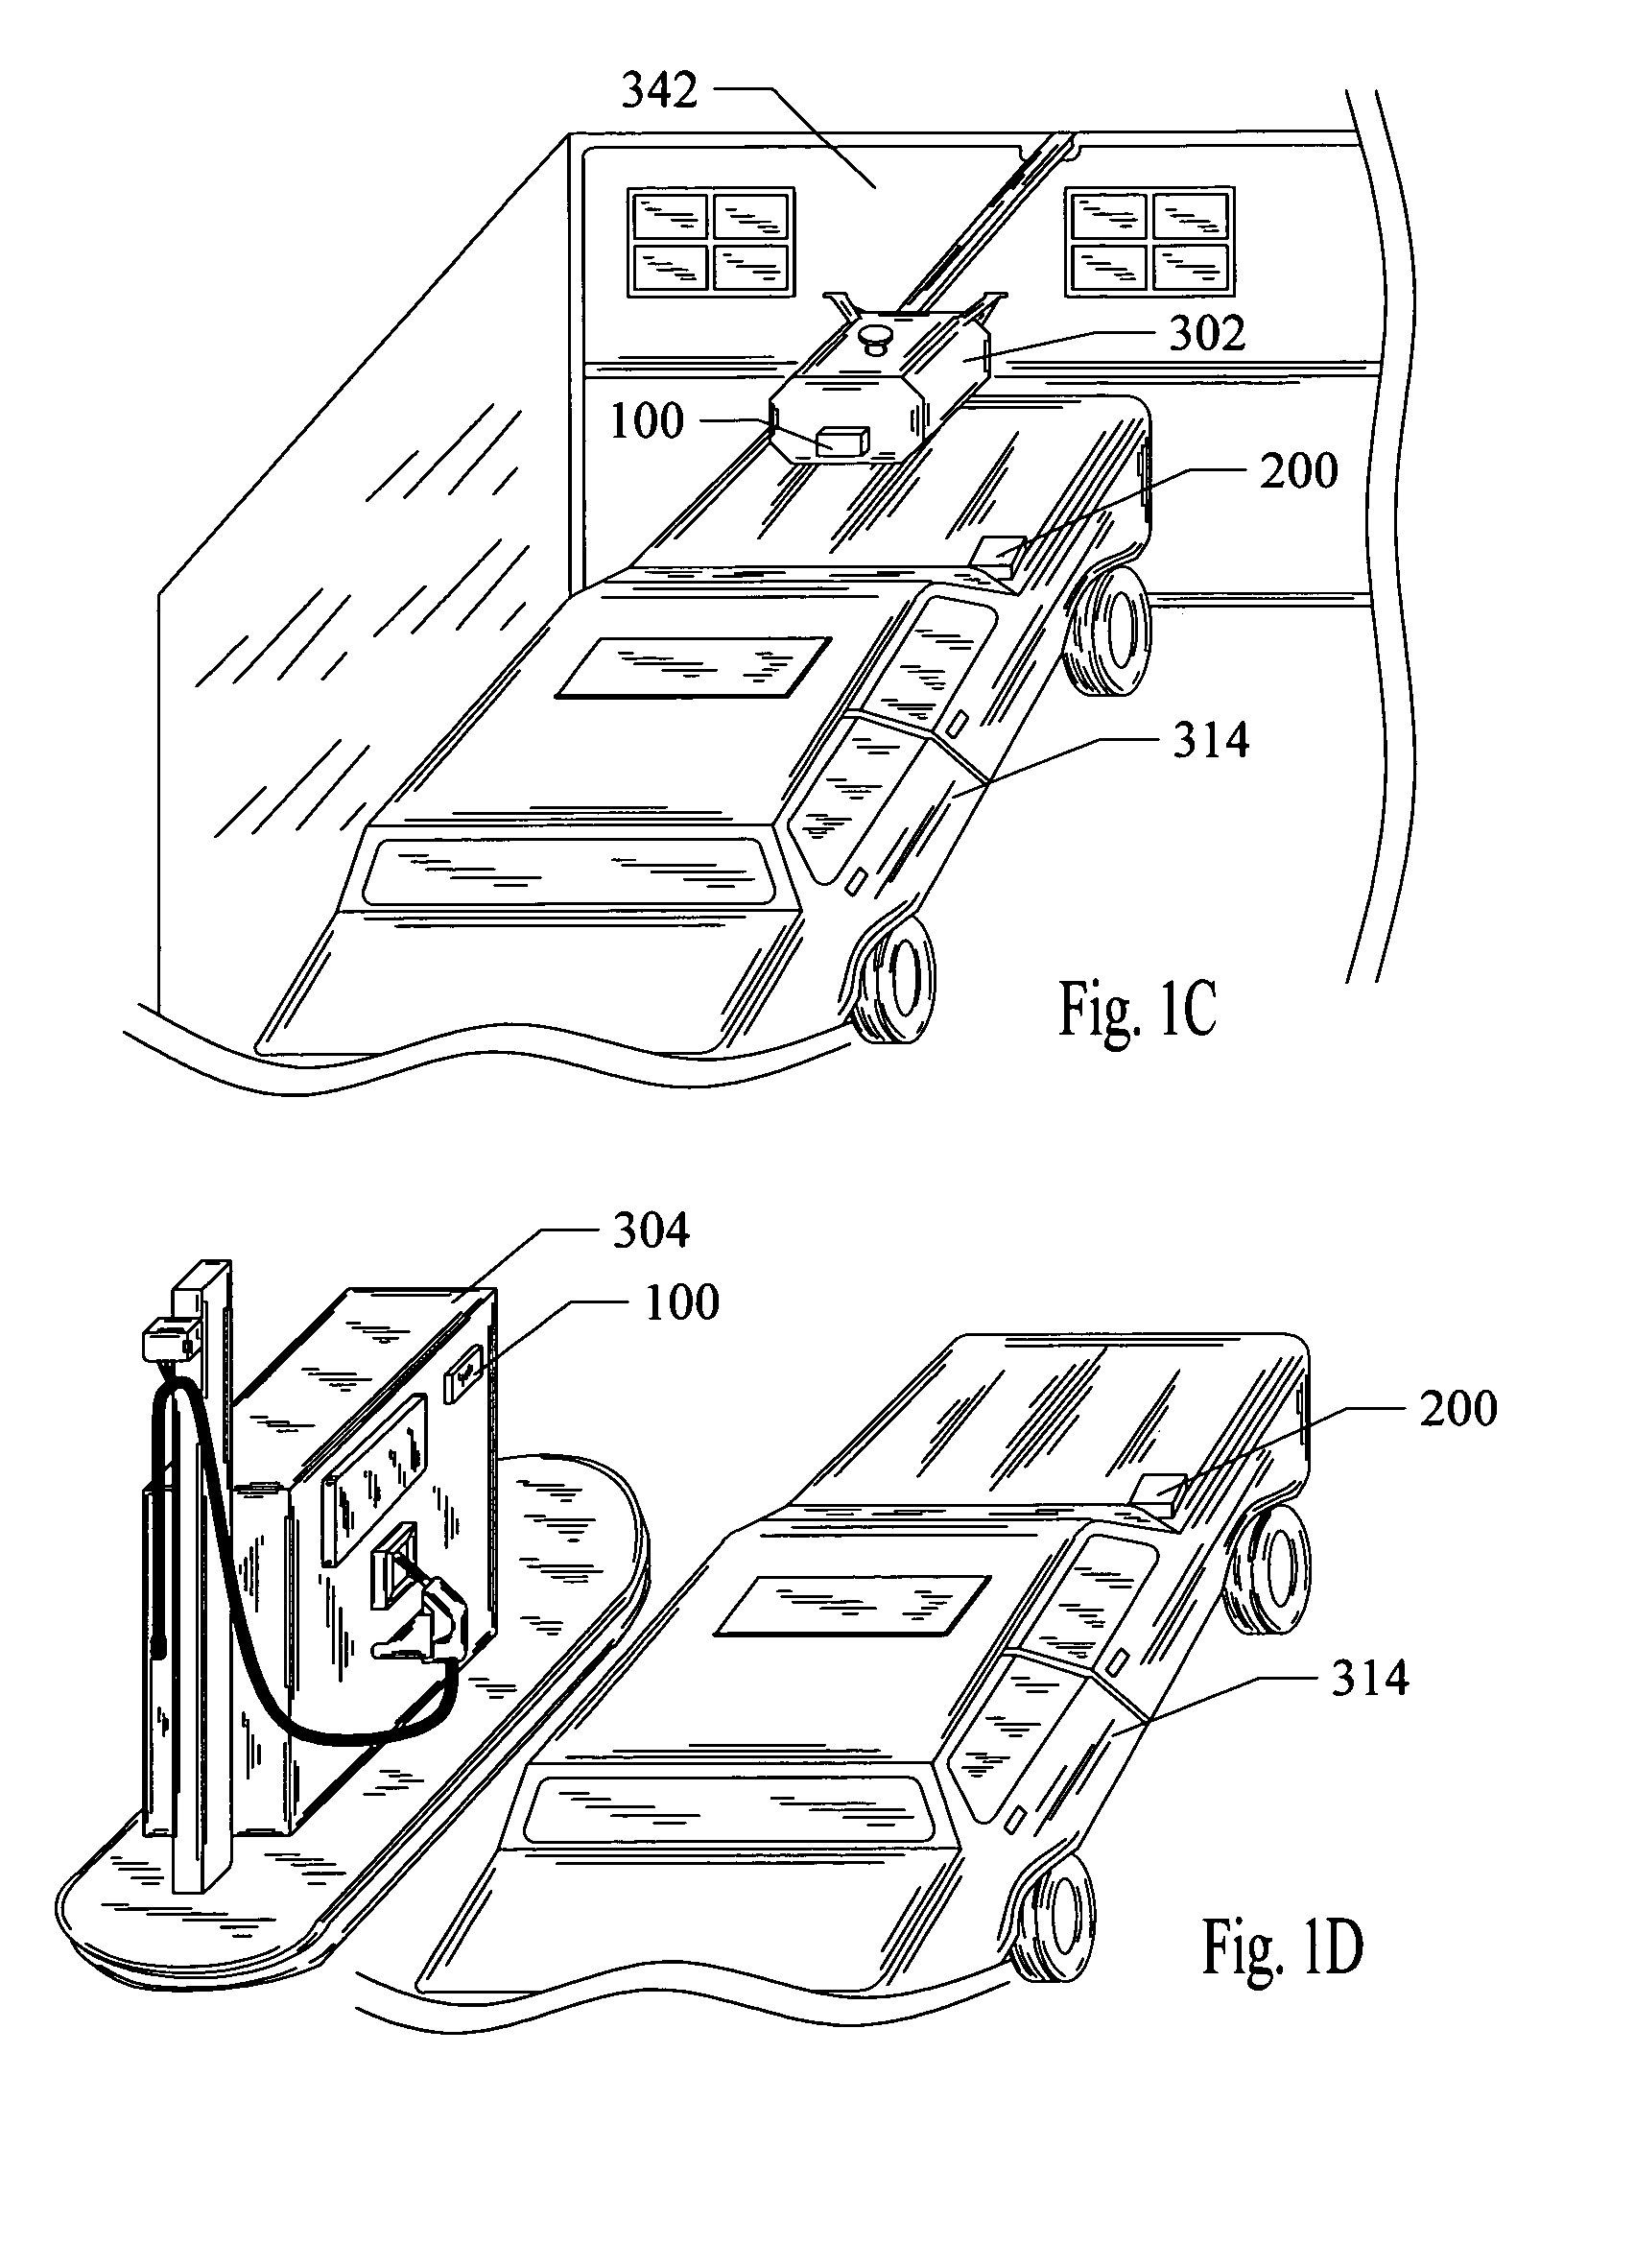 Wireless vehicle diagnostics device and method with service and part determination capabilities